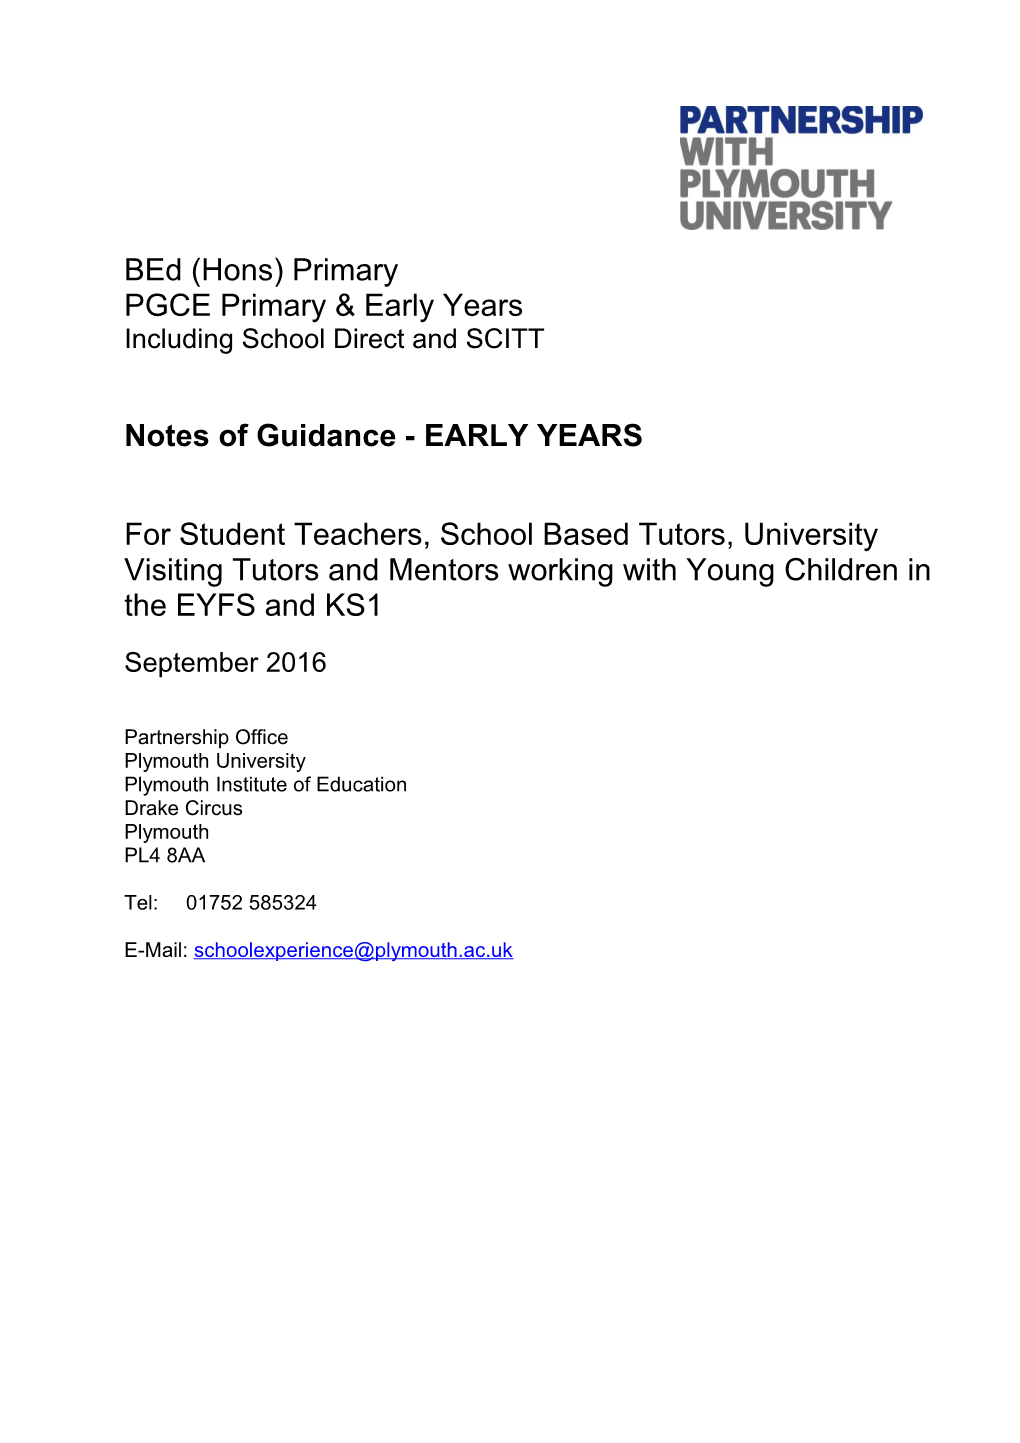 PGCE Primary & Early Years